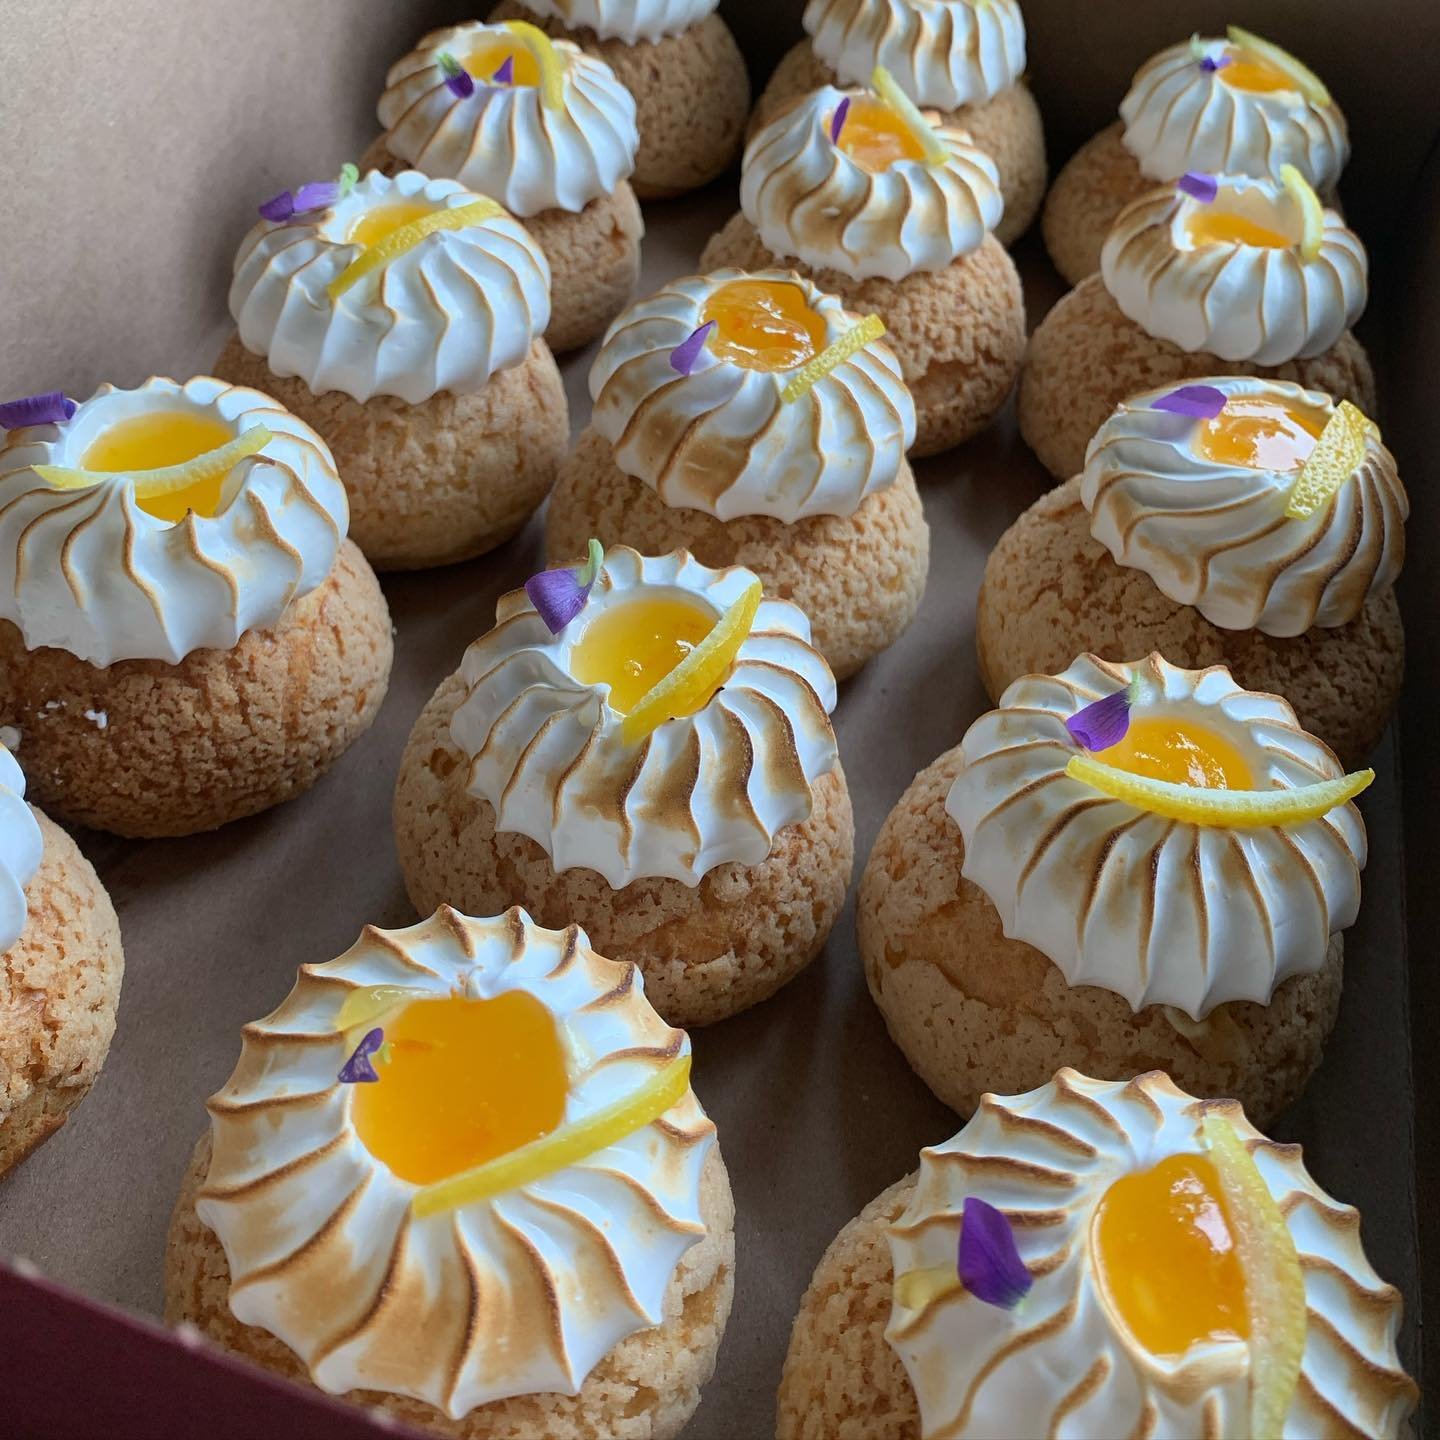 Sunny little choux buns with vanilla cr&egrave;me diplomat, citrus jelly and toasted meringue